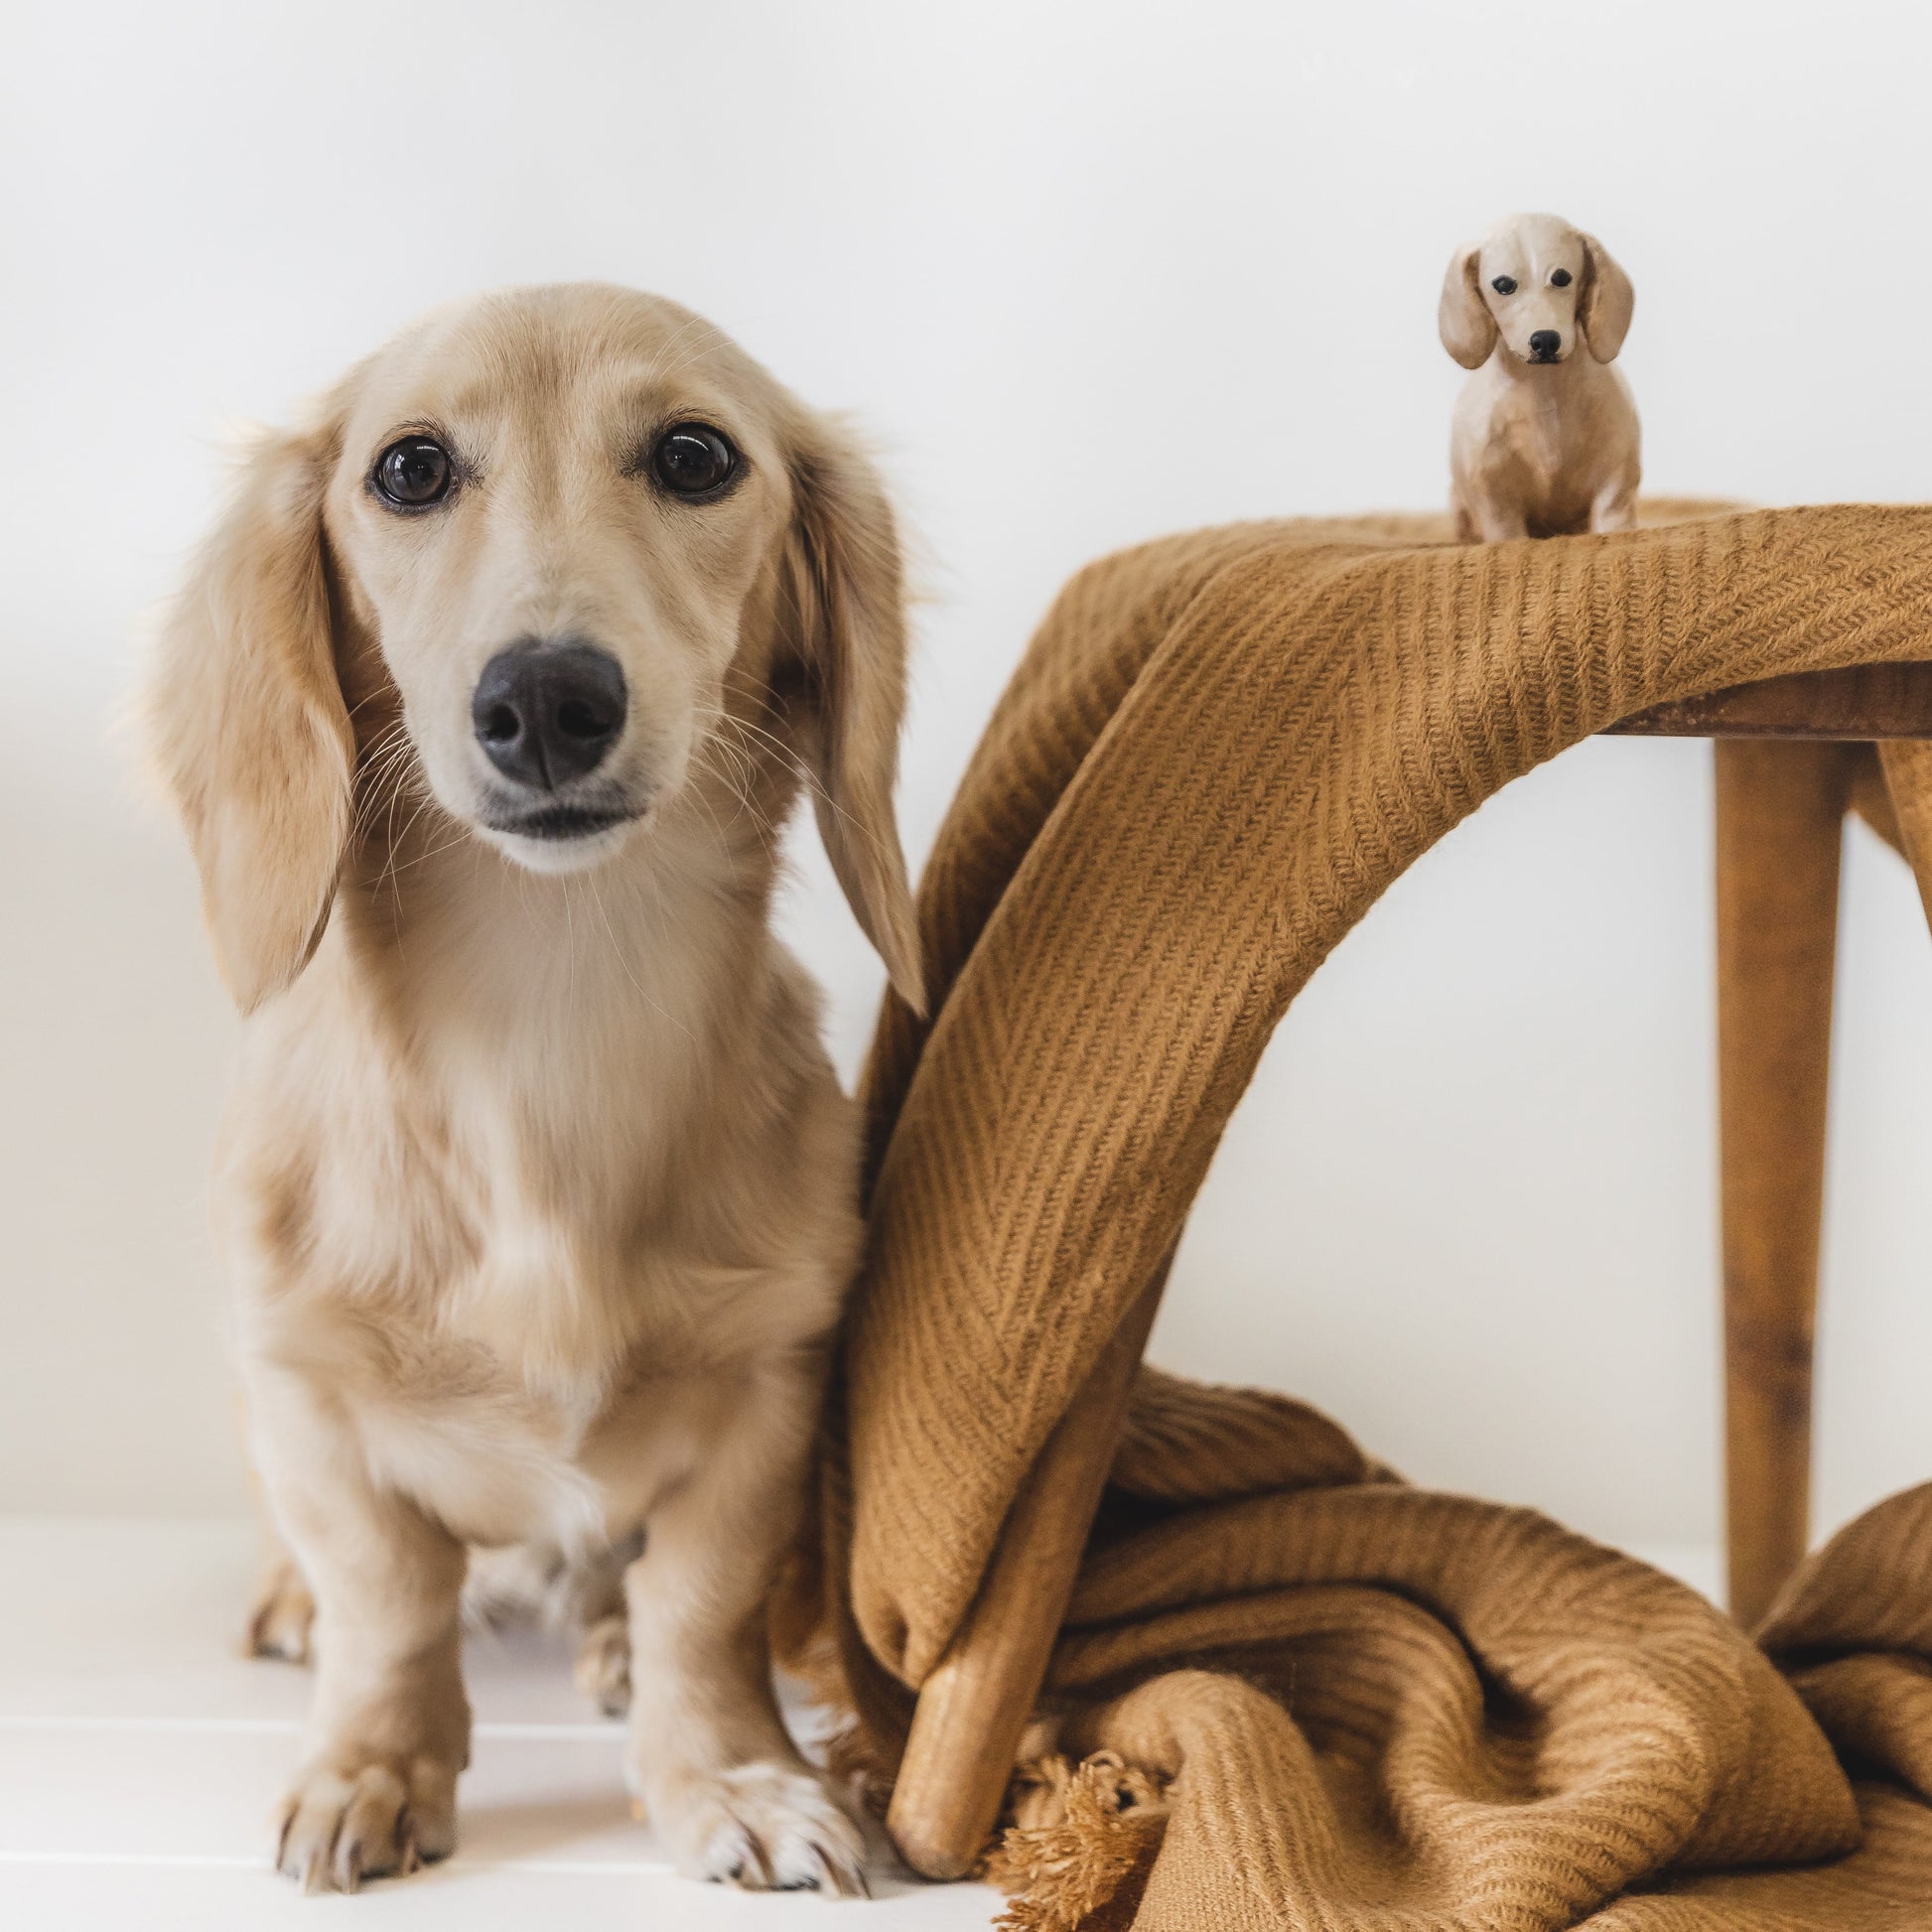 Custom handmade dog figurine, positioned beside the dachshund it is modelled upon.